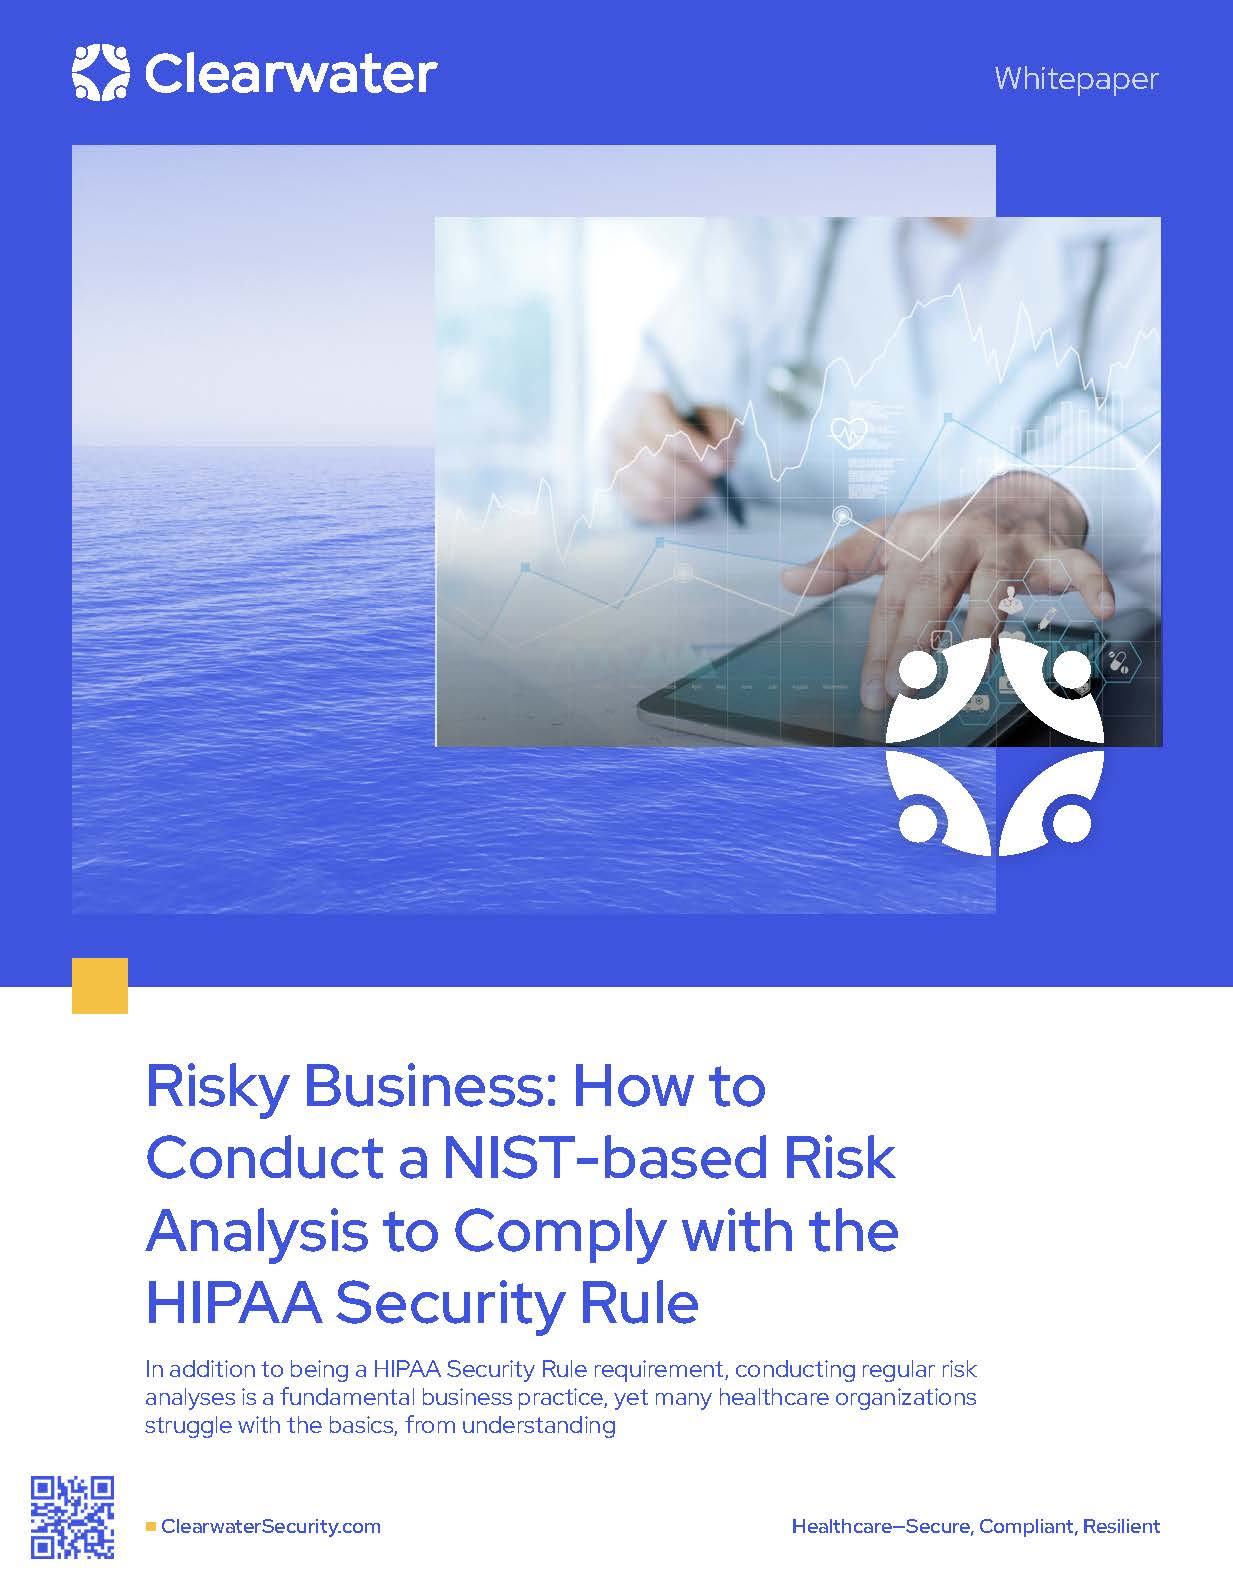 How to Conduct a NIST-based Risk Analysis to Comply with the HIPAA Security Rule by Clearwater